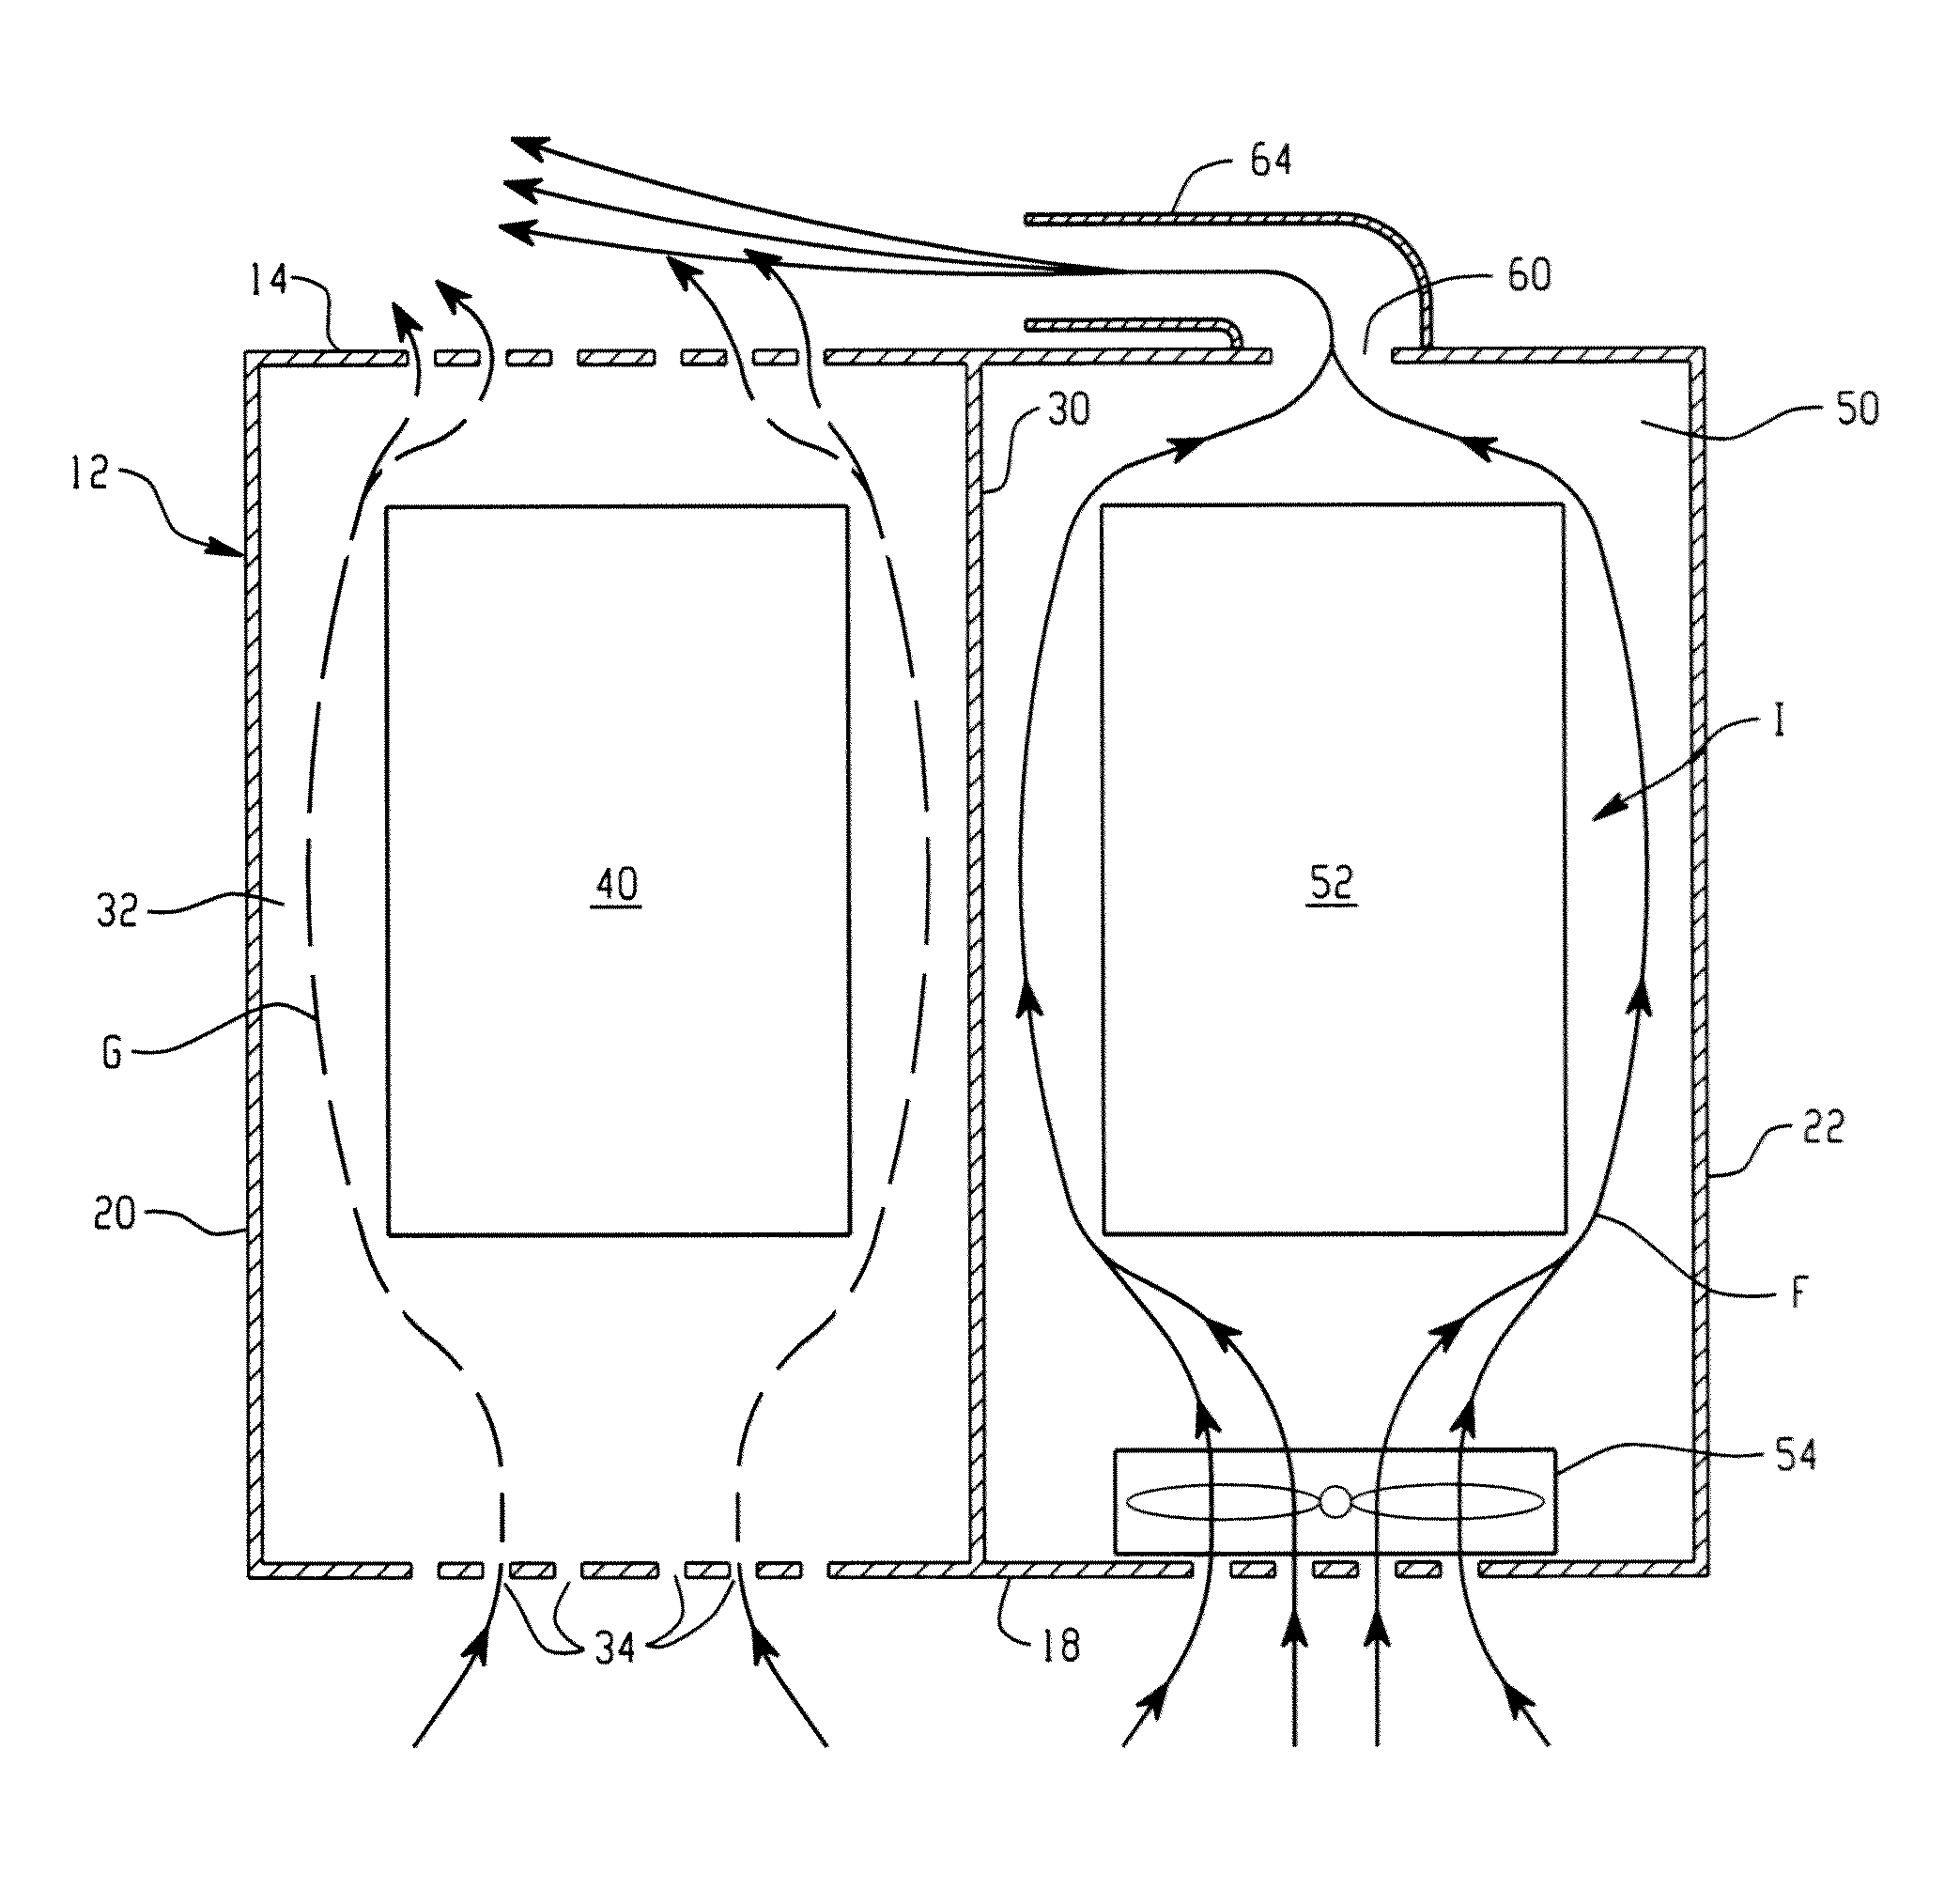 Device and method using induction to improve natural convection cooling